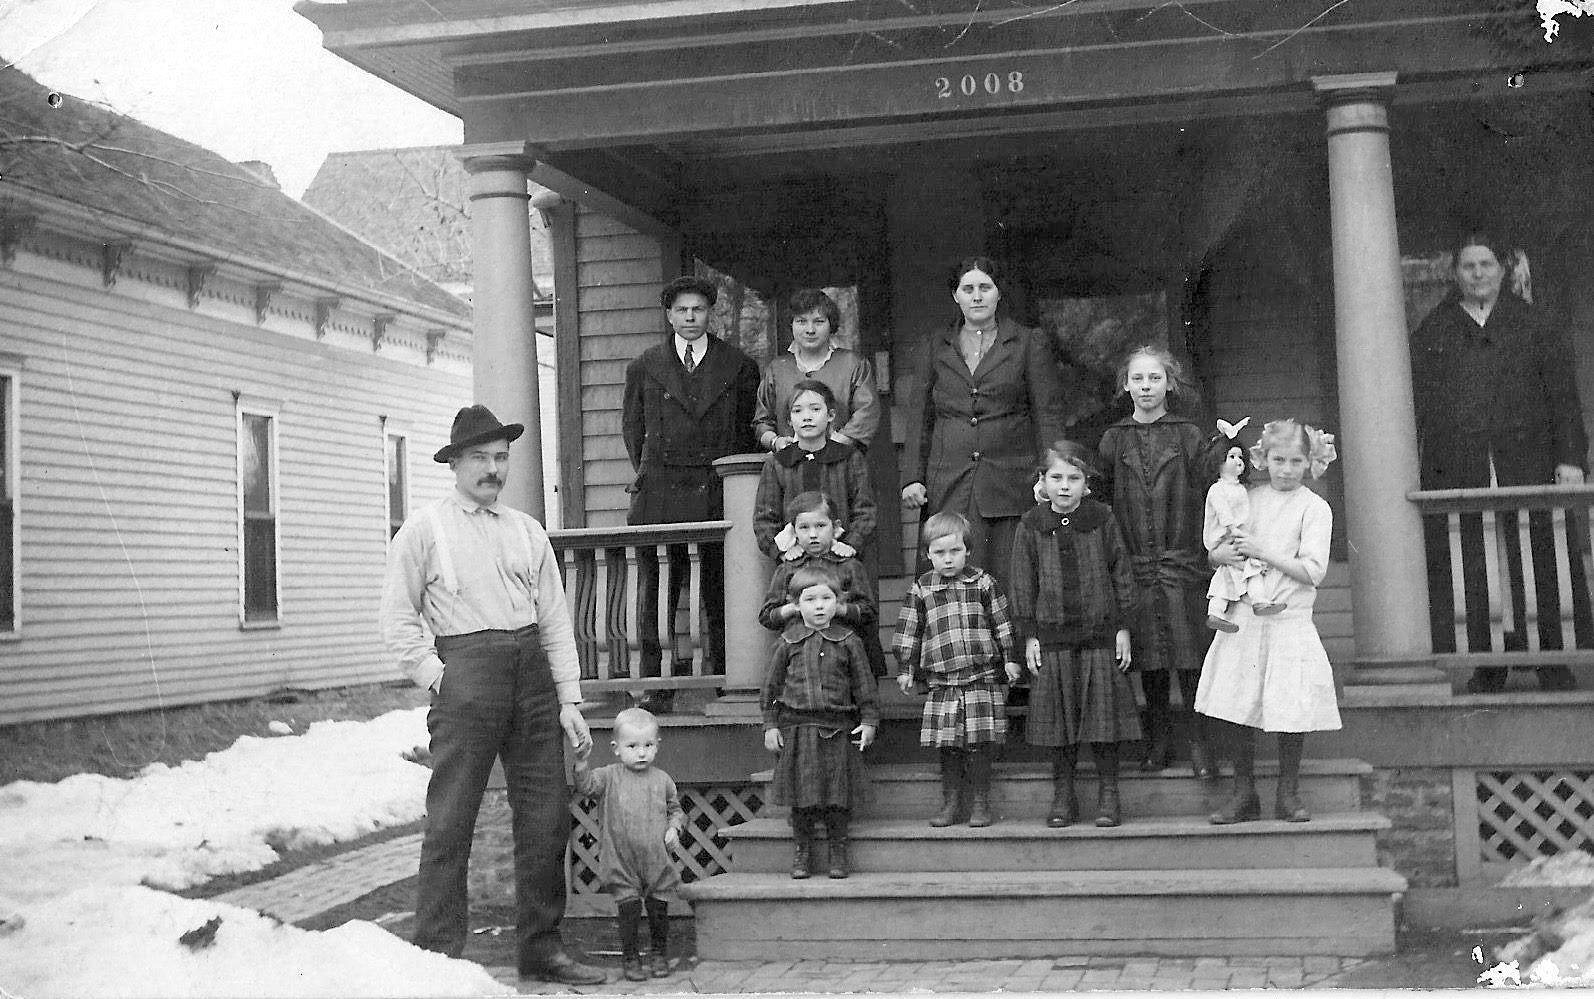 Vogel family at 2008 R Street in Lincoln, NE circa 1915. The family later migrated to Portland, Oregon. Source: Ginny Mapes.